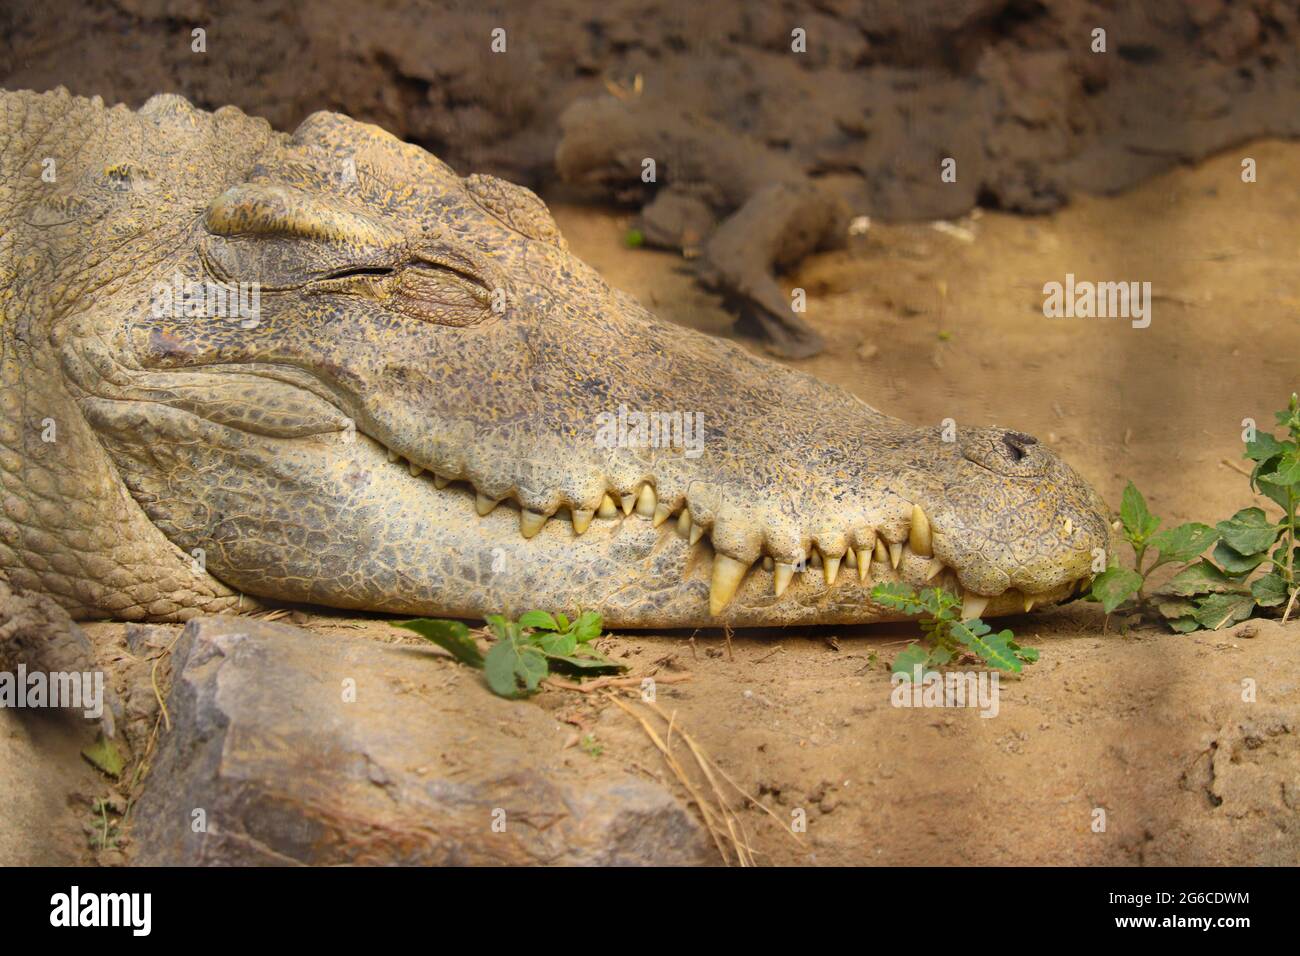 69,079 Crocodile Leather Images, Stock Photos, 3D objects